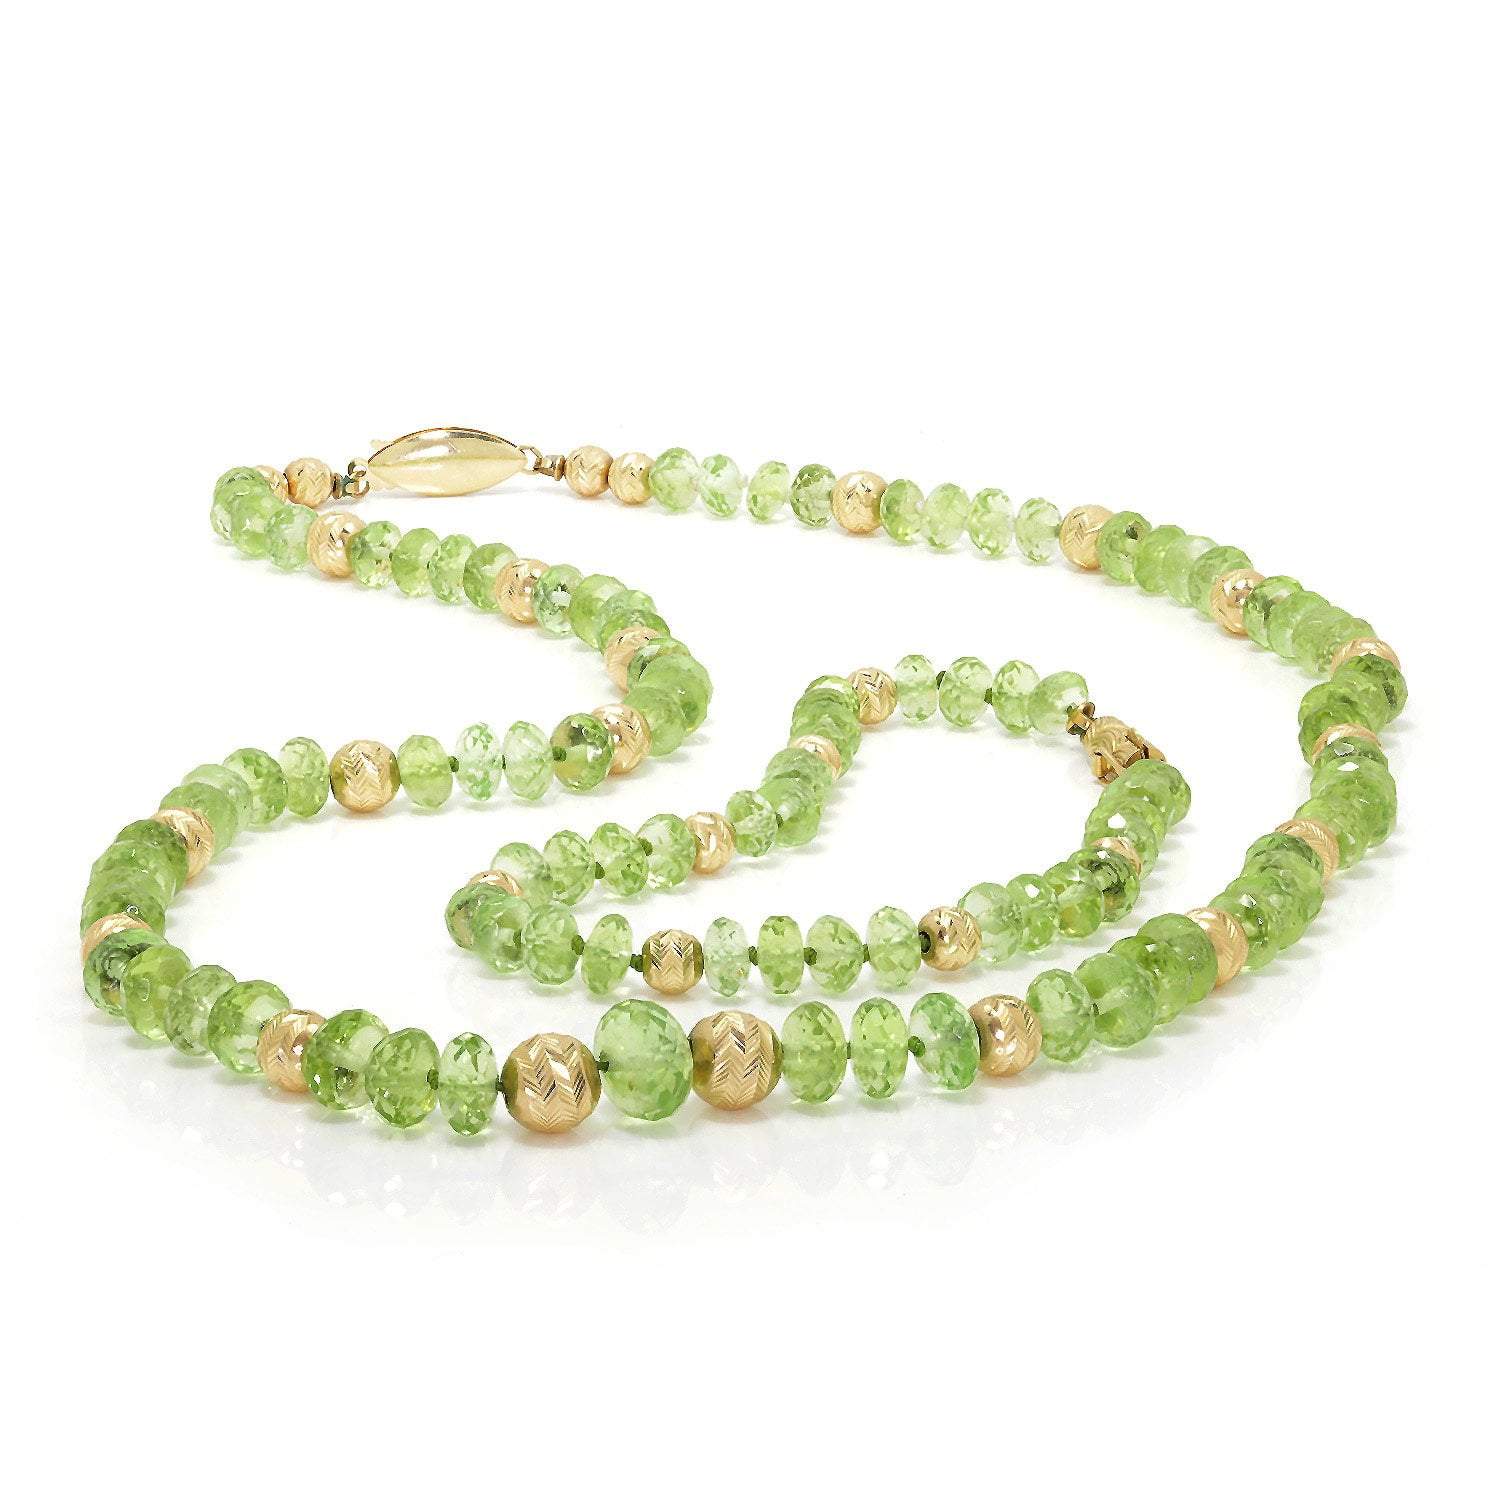 Peridot Bead Necklace & Bracelet Set with 14kt Yellow Gold Beads